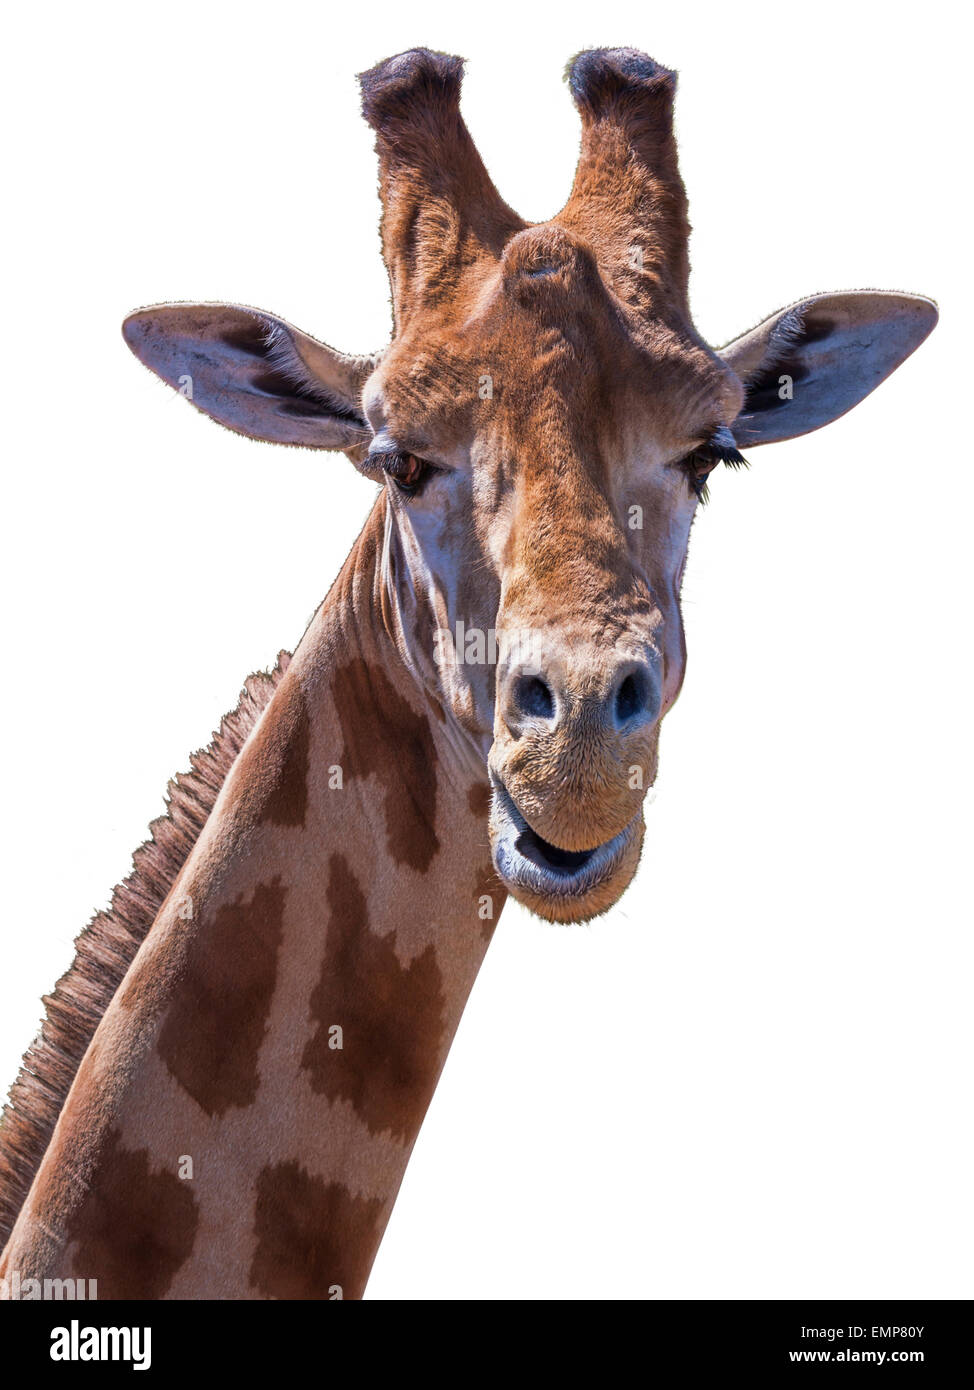 portrait of a giraffe showing head and part of neck. Looking at camera. Silly pose. Isolated on white background Stock Photo